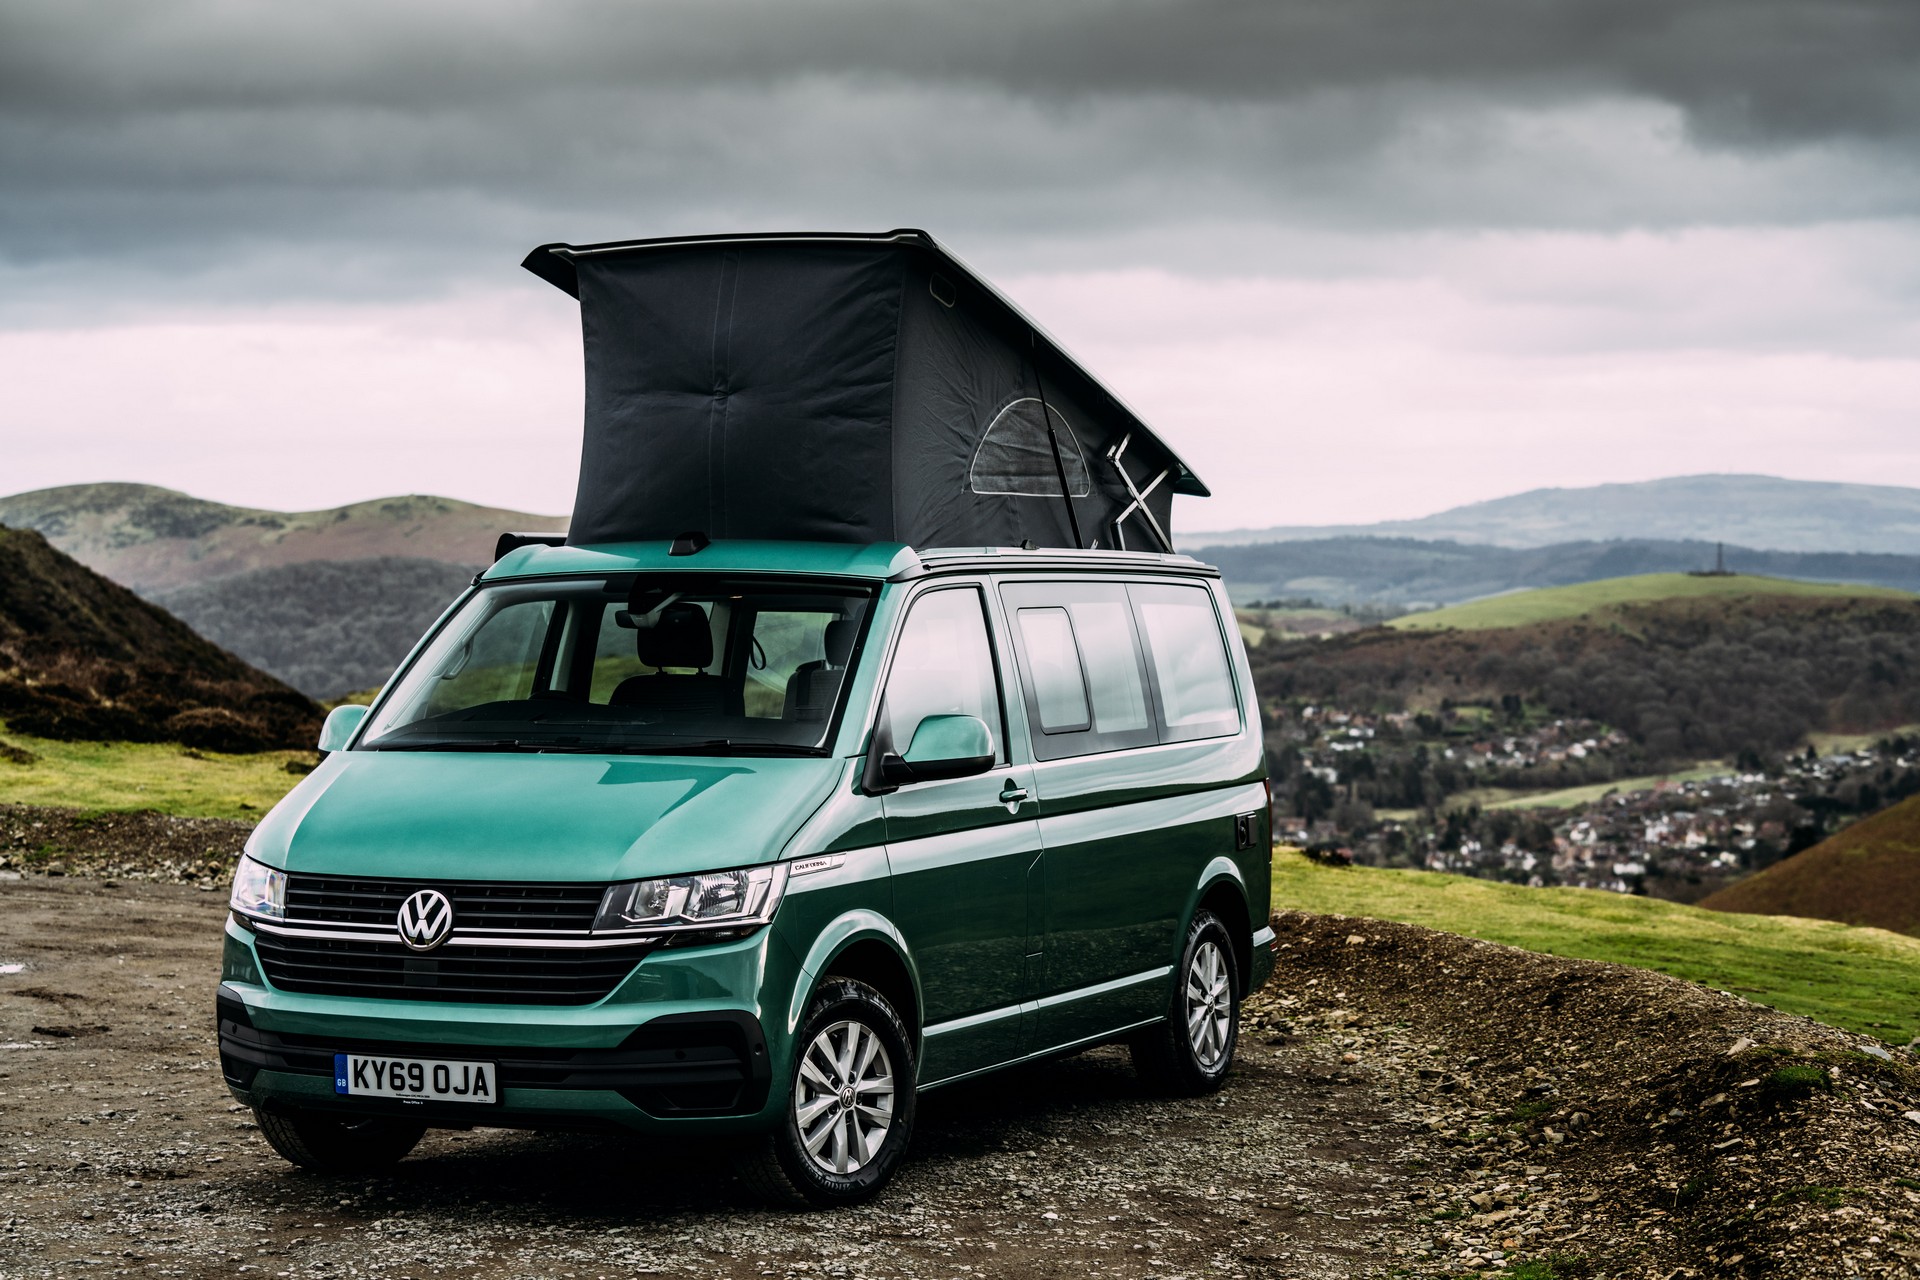 https://s1.cdn.autoevolution.com/images/news/vw-california-campervan-gets-a-spring-upgrade-for-the-uk-with-the-68k-surf-trim-211113_1.jpg